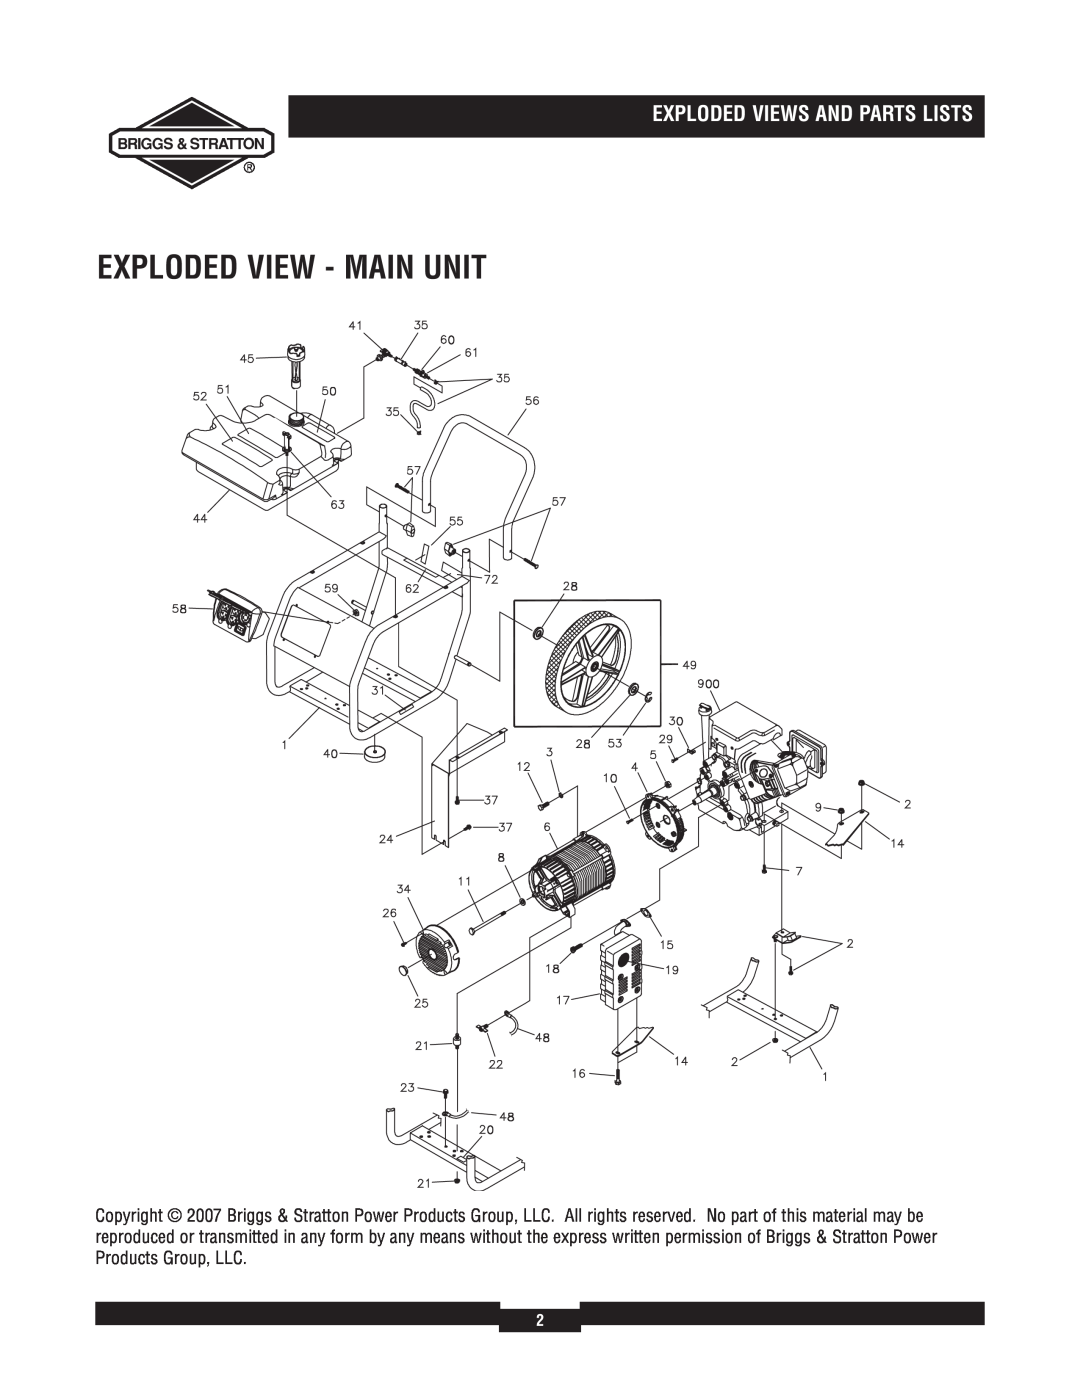 Briggs & Stratton 30324 manual Exploded View - Main Unit, Exploded Views And Parts Lists 